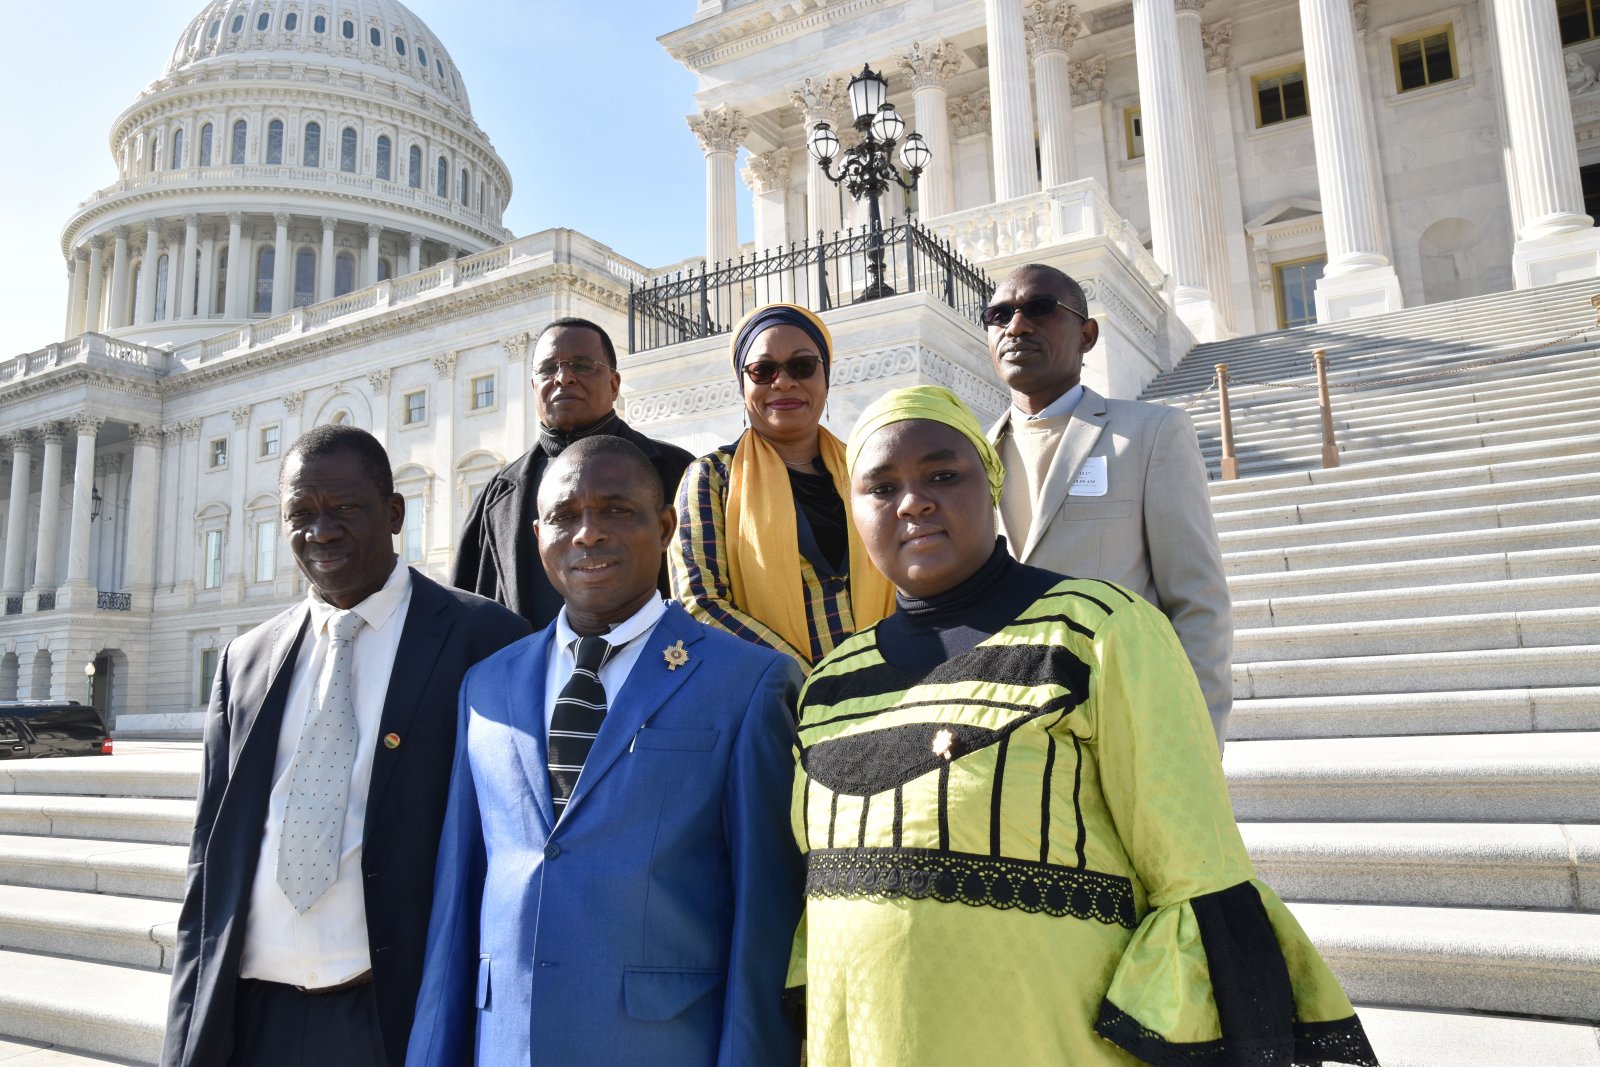 MPs from Burkina Faso, Mali and Niger Discuss Countering Violent Extremism with U.S. Counterparts